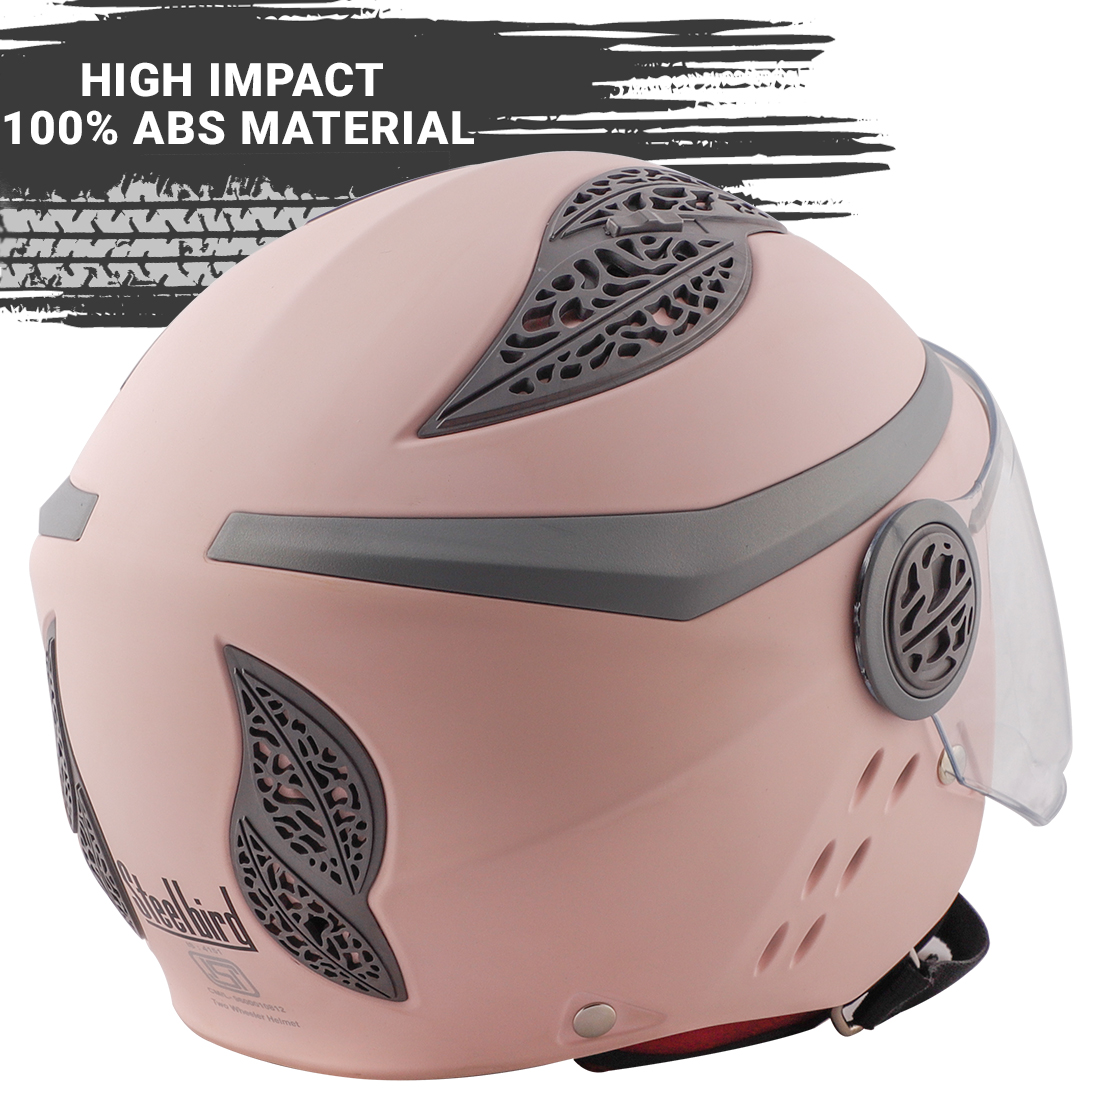 Steelbird Fairy Specially Designed ISI Certified Helmet For Girls || Womens  (Glossy Light Pink With Clear Visor)